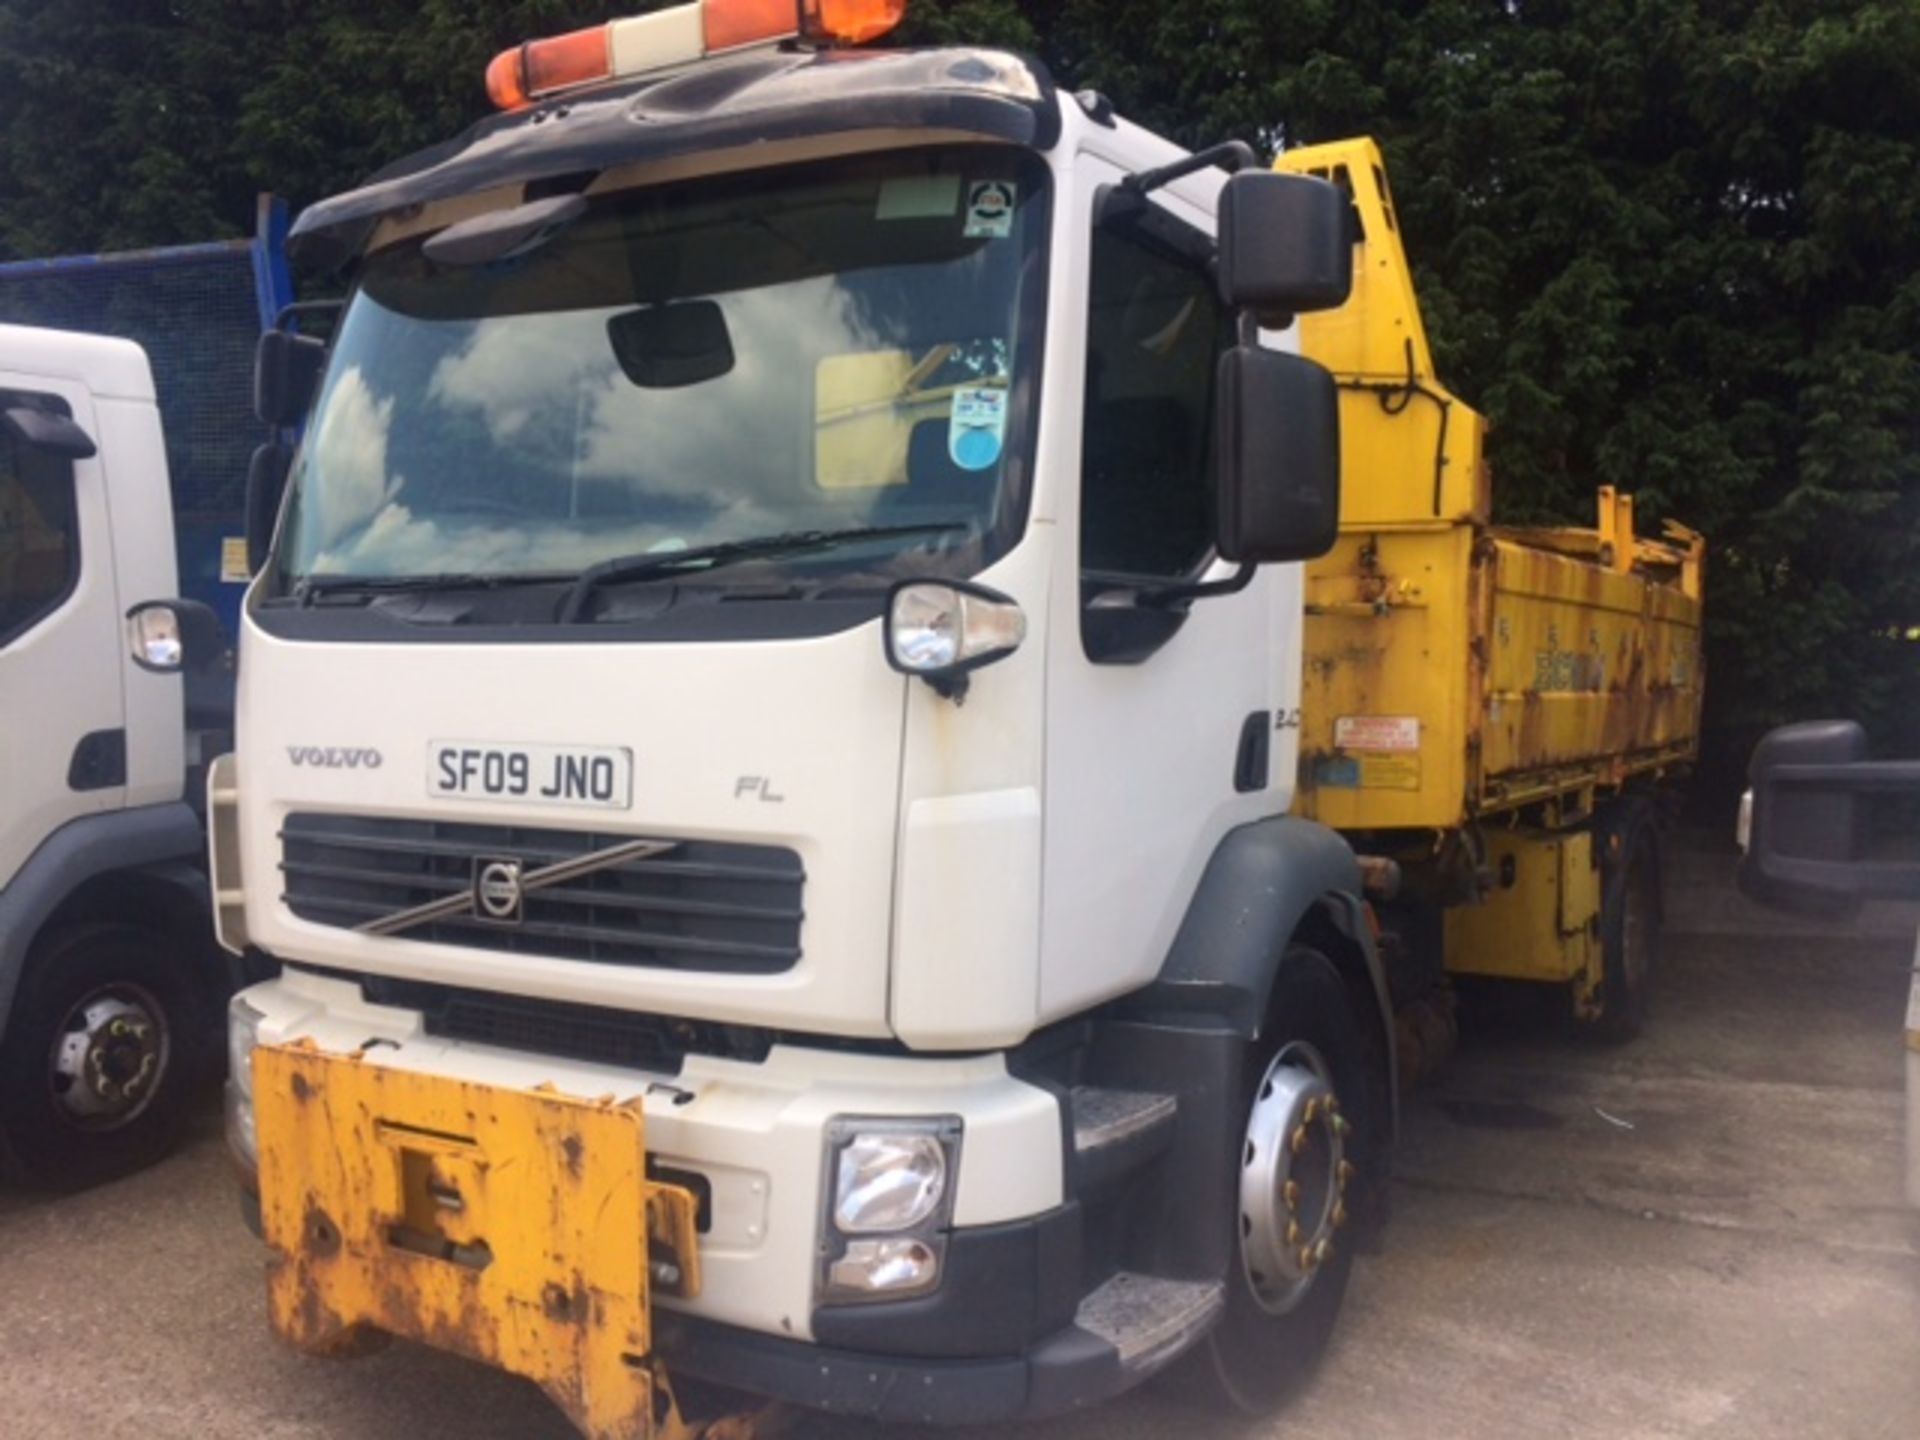 2009 Volvo FLH 240 Tipper - Image 6 of 9